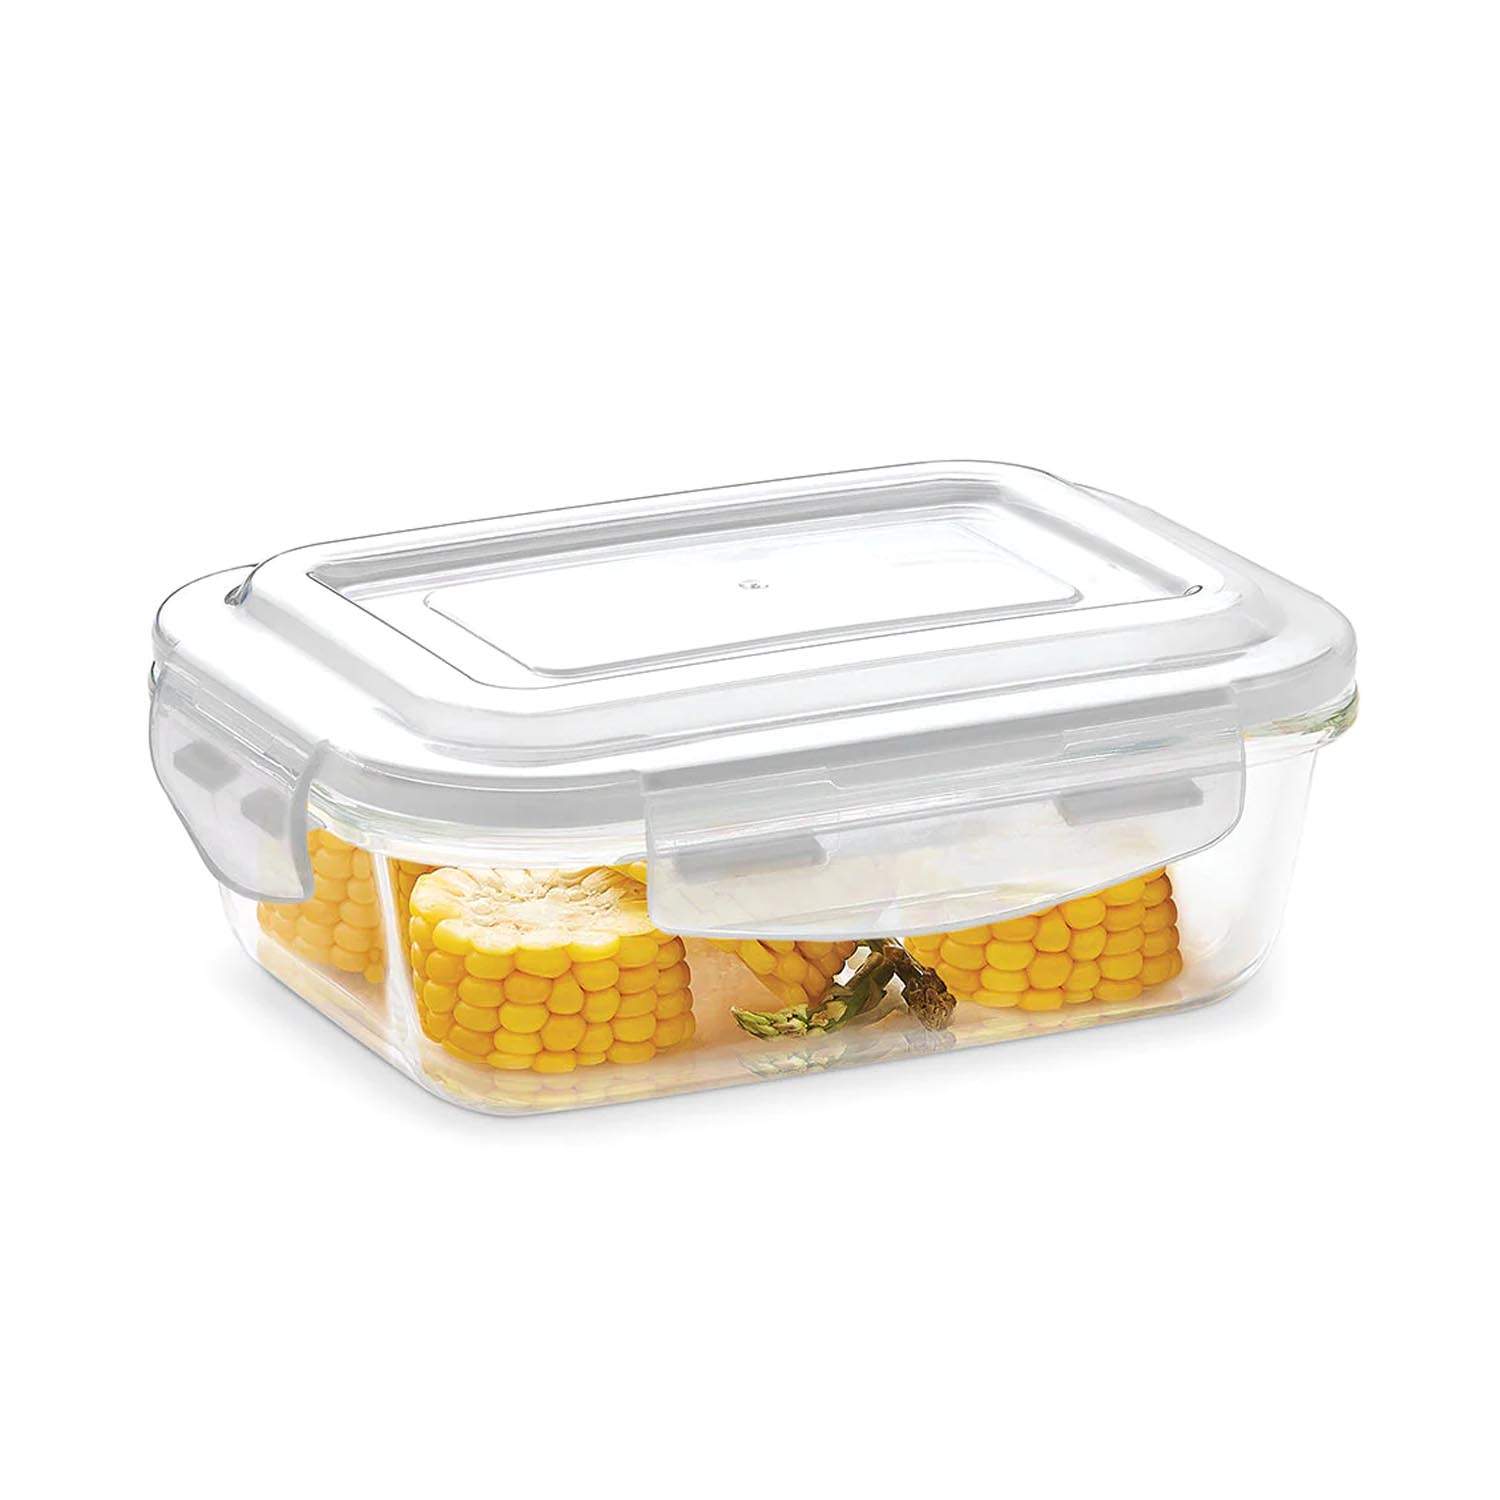 Borosil Klip-N-Store Rectangular Glass Storage Container With Air Tight Lid 